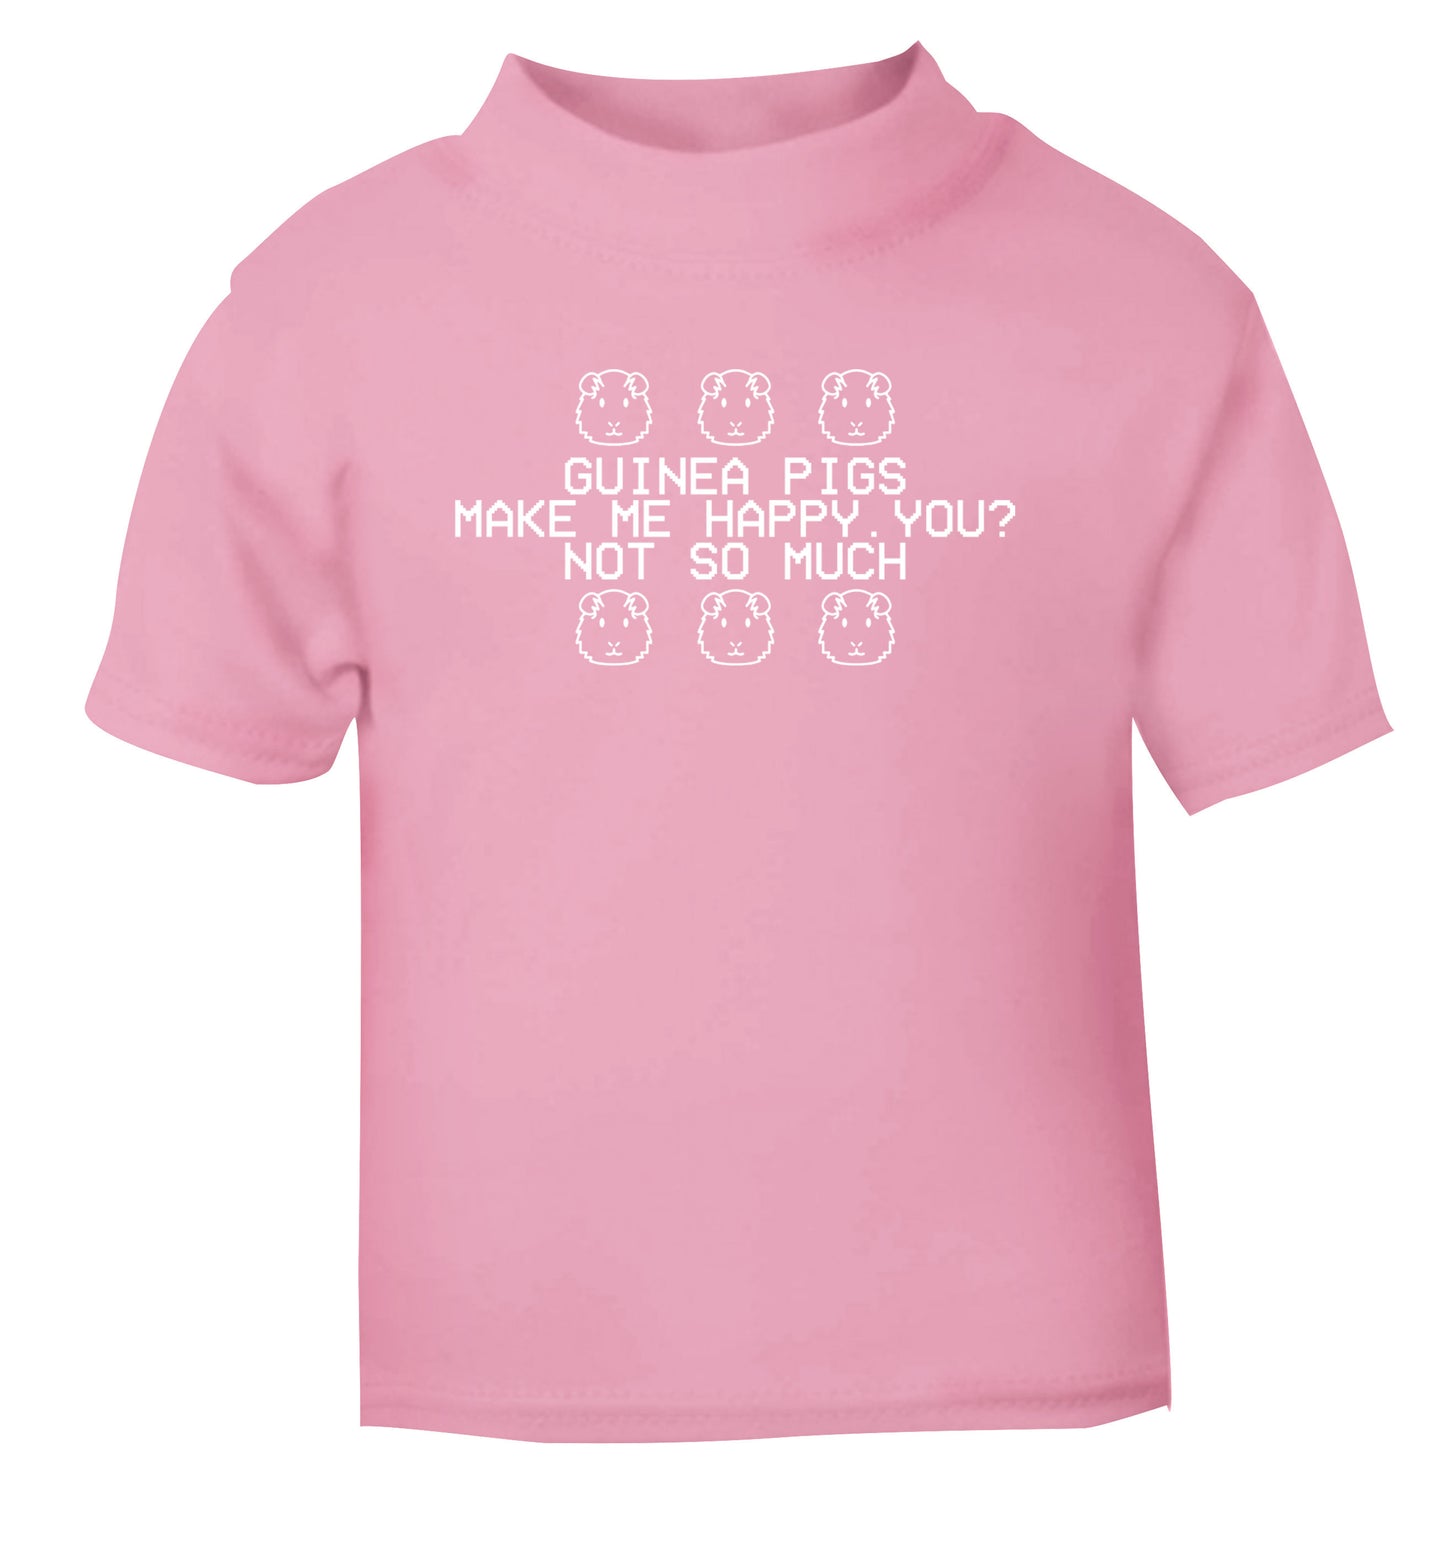 Guinea pigs make me happy, you not so much light pink Baby Toddler Tshirt 2 Years